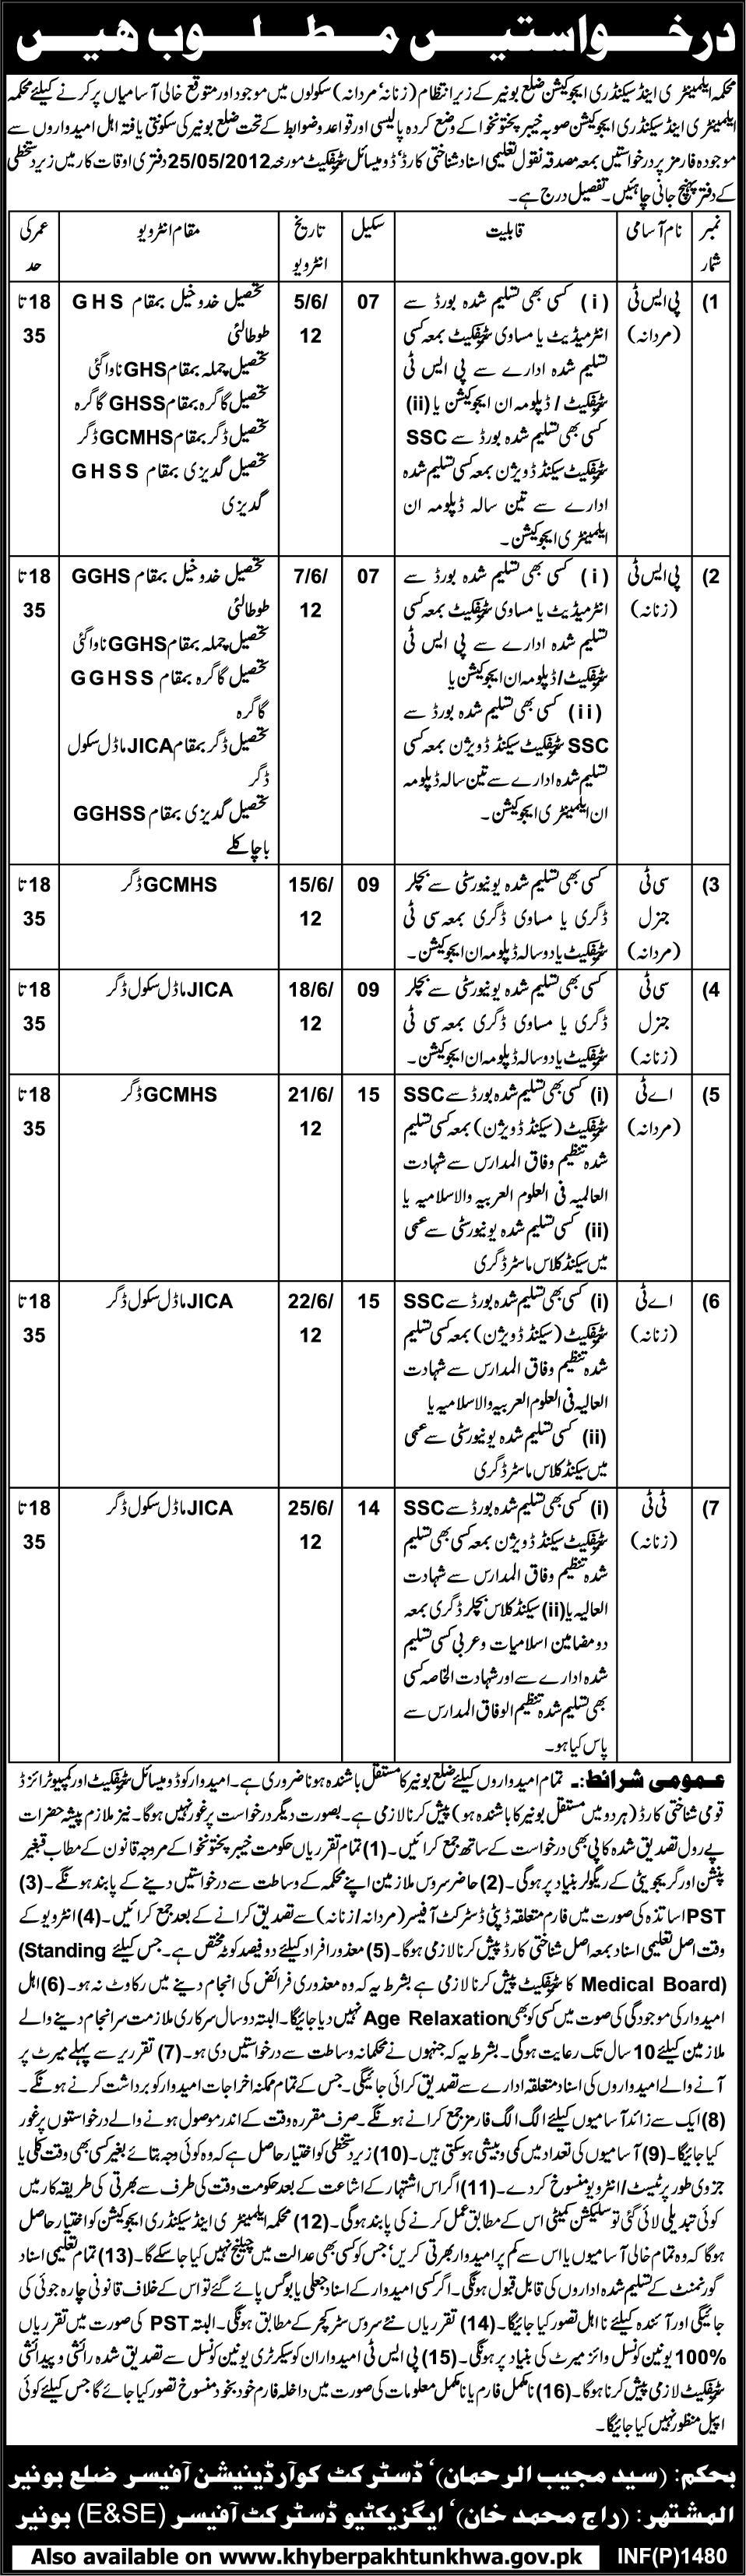 Jobs at Department of Elementary & Secondary Education